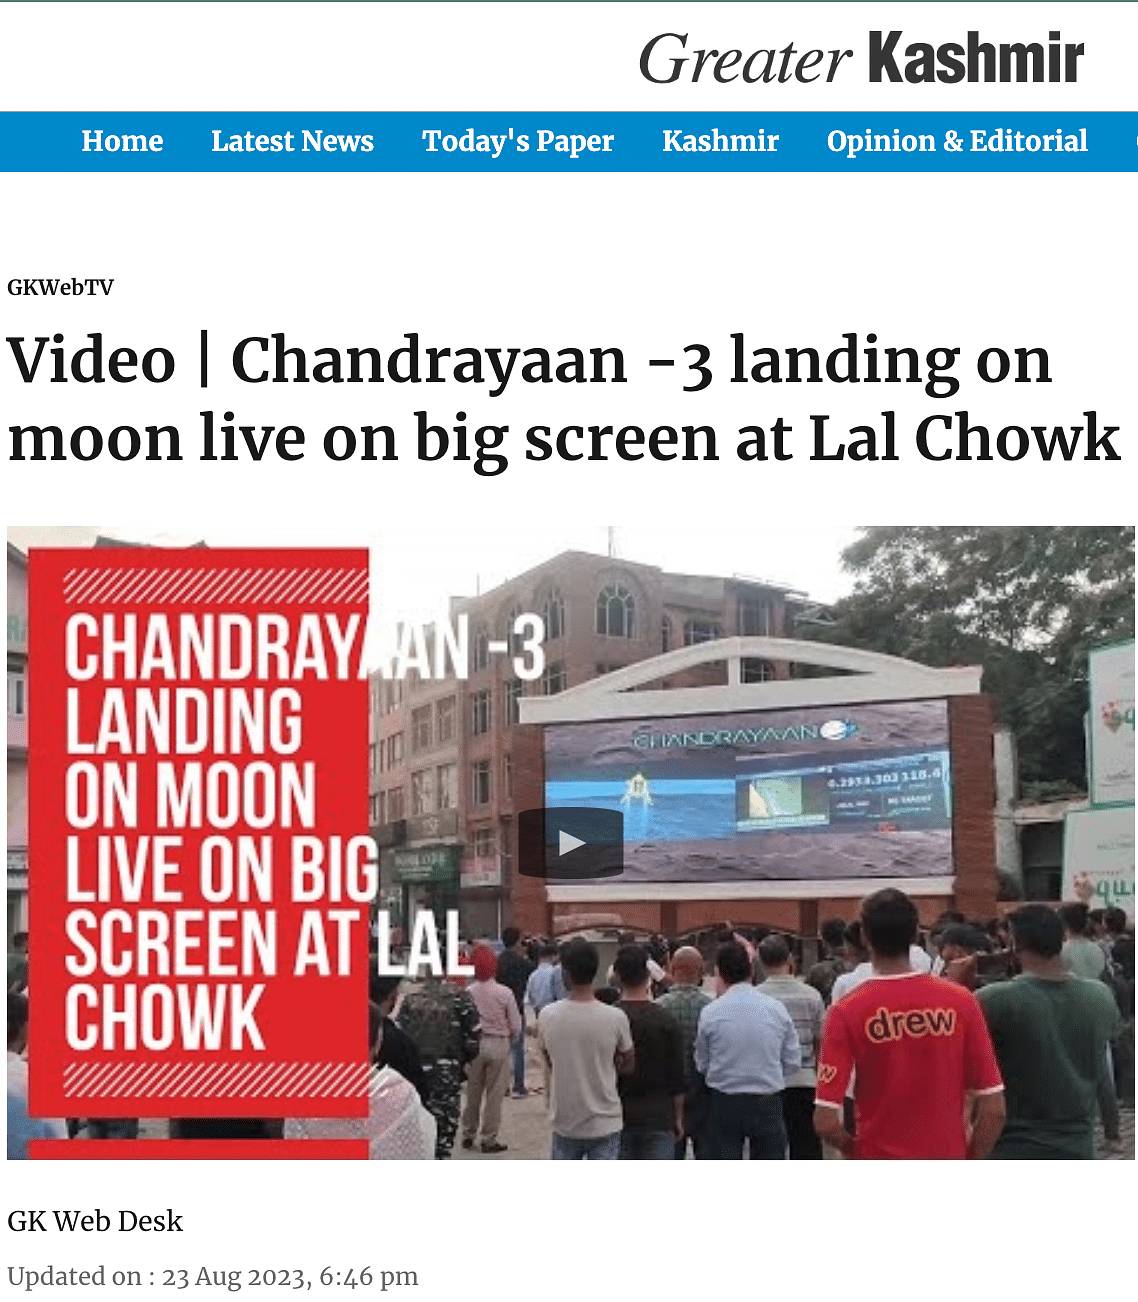 The original photo shows the crowd watching the live broadcast of ISRO's Chandrayaan-3 landing on 23 August.